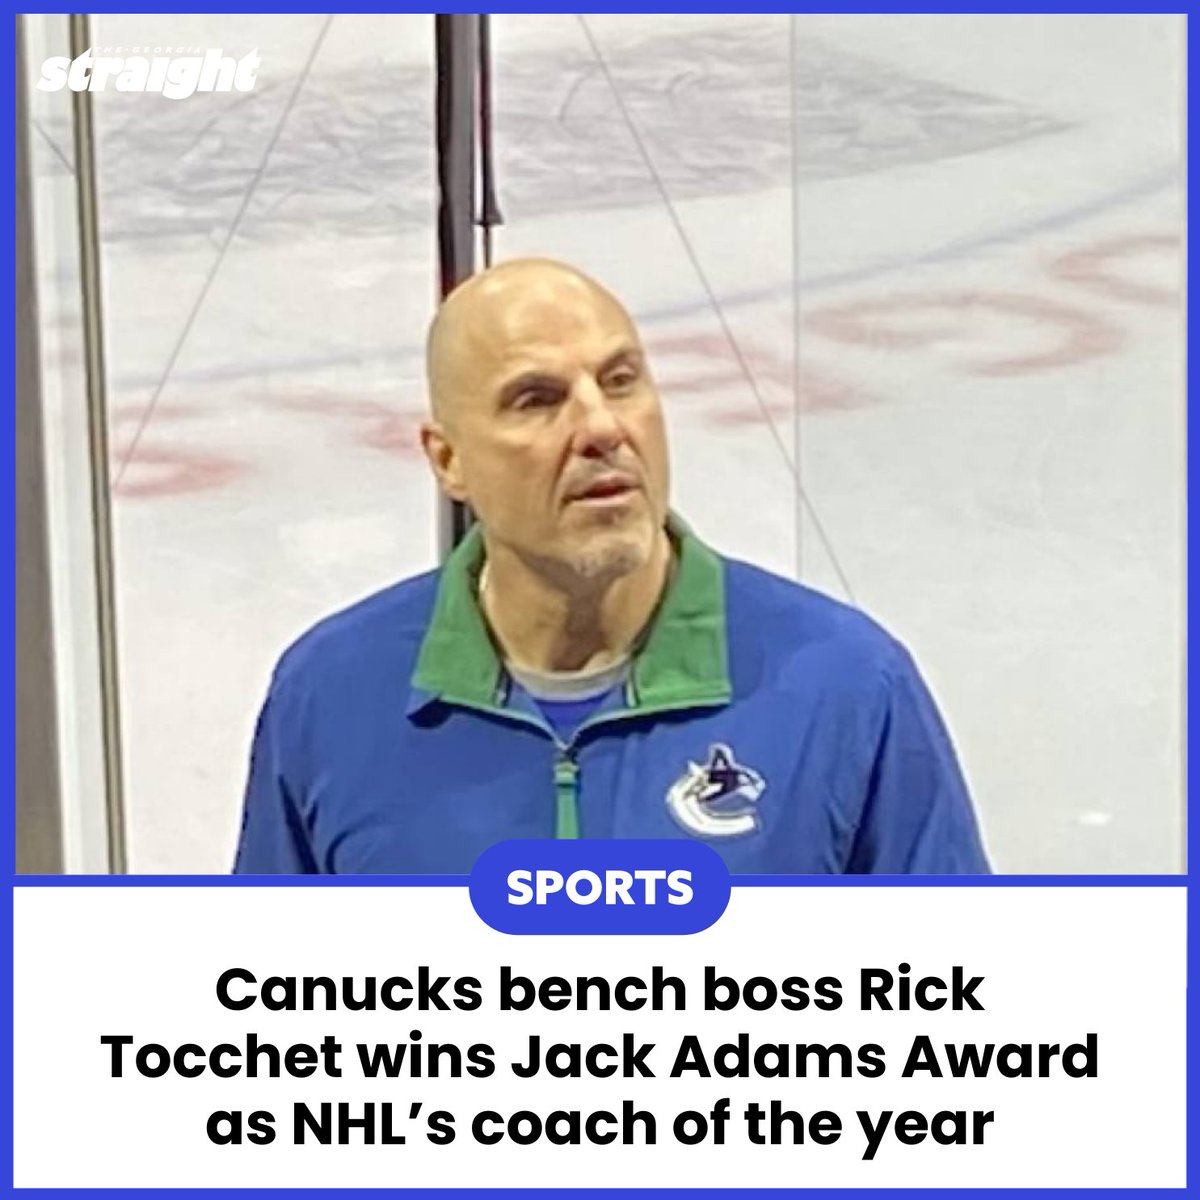 Rick Tocchet has become the third Vancouver coach in history to receive this award. What are your thoughts on how Tocchet led the Canucks this season? 👇 Read more: straight.com/city-culture/c…